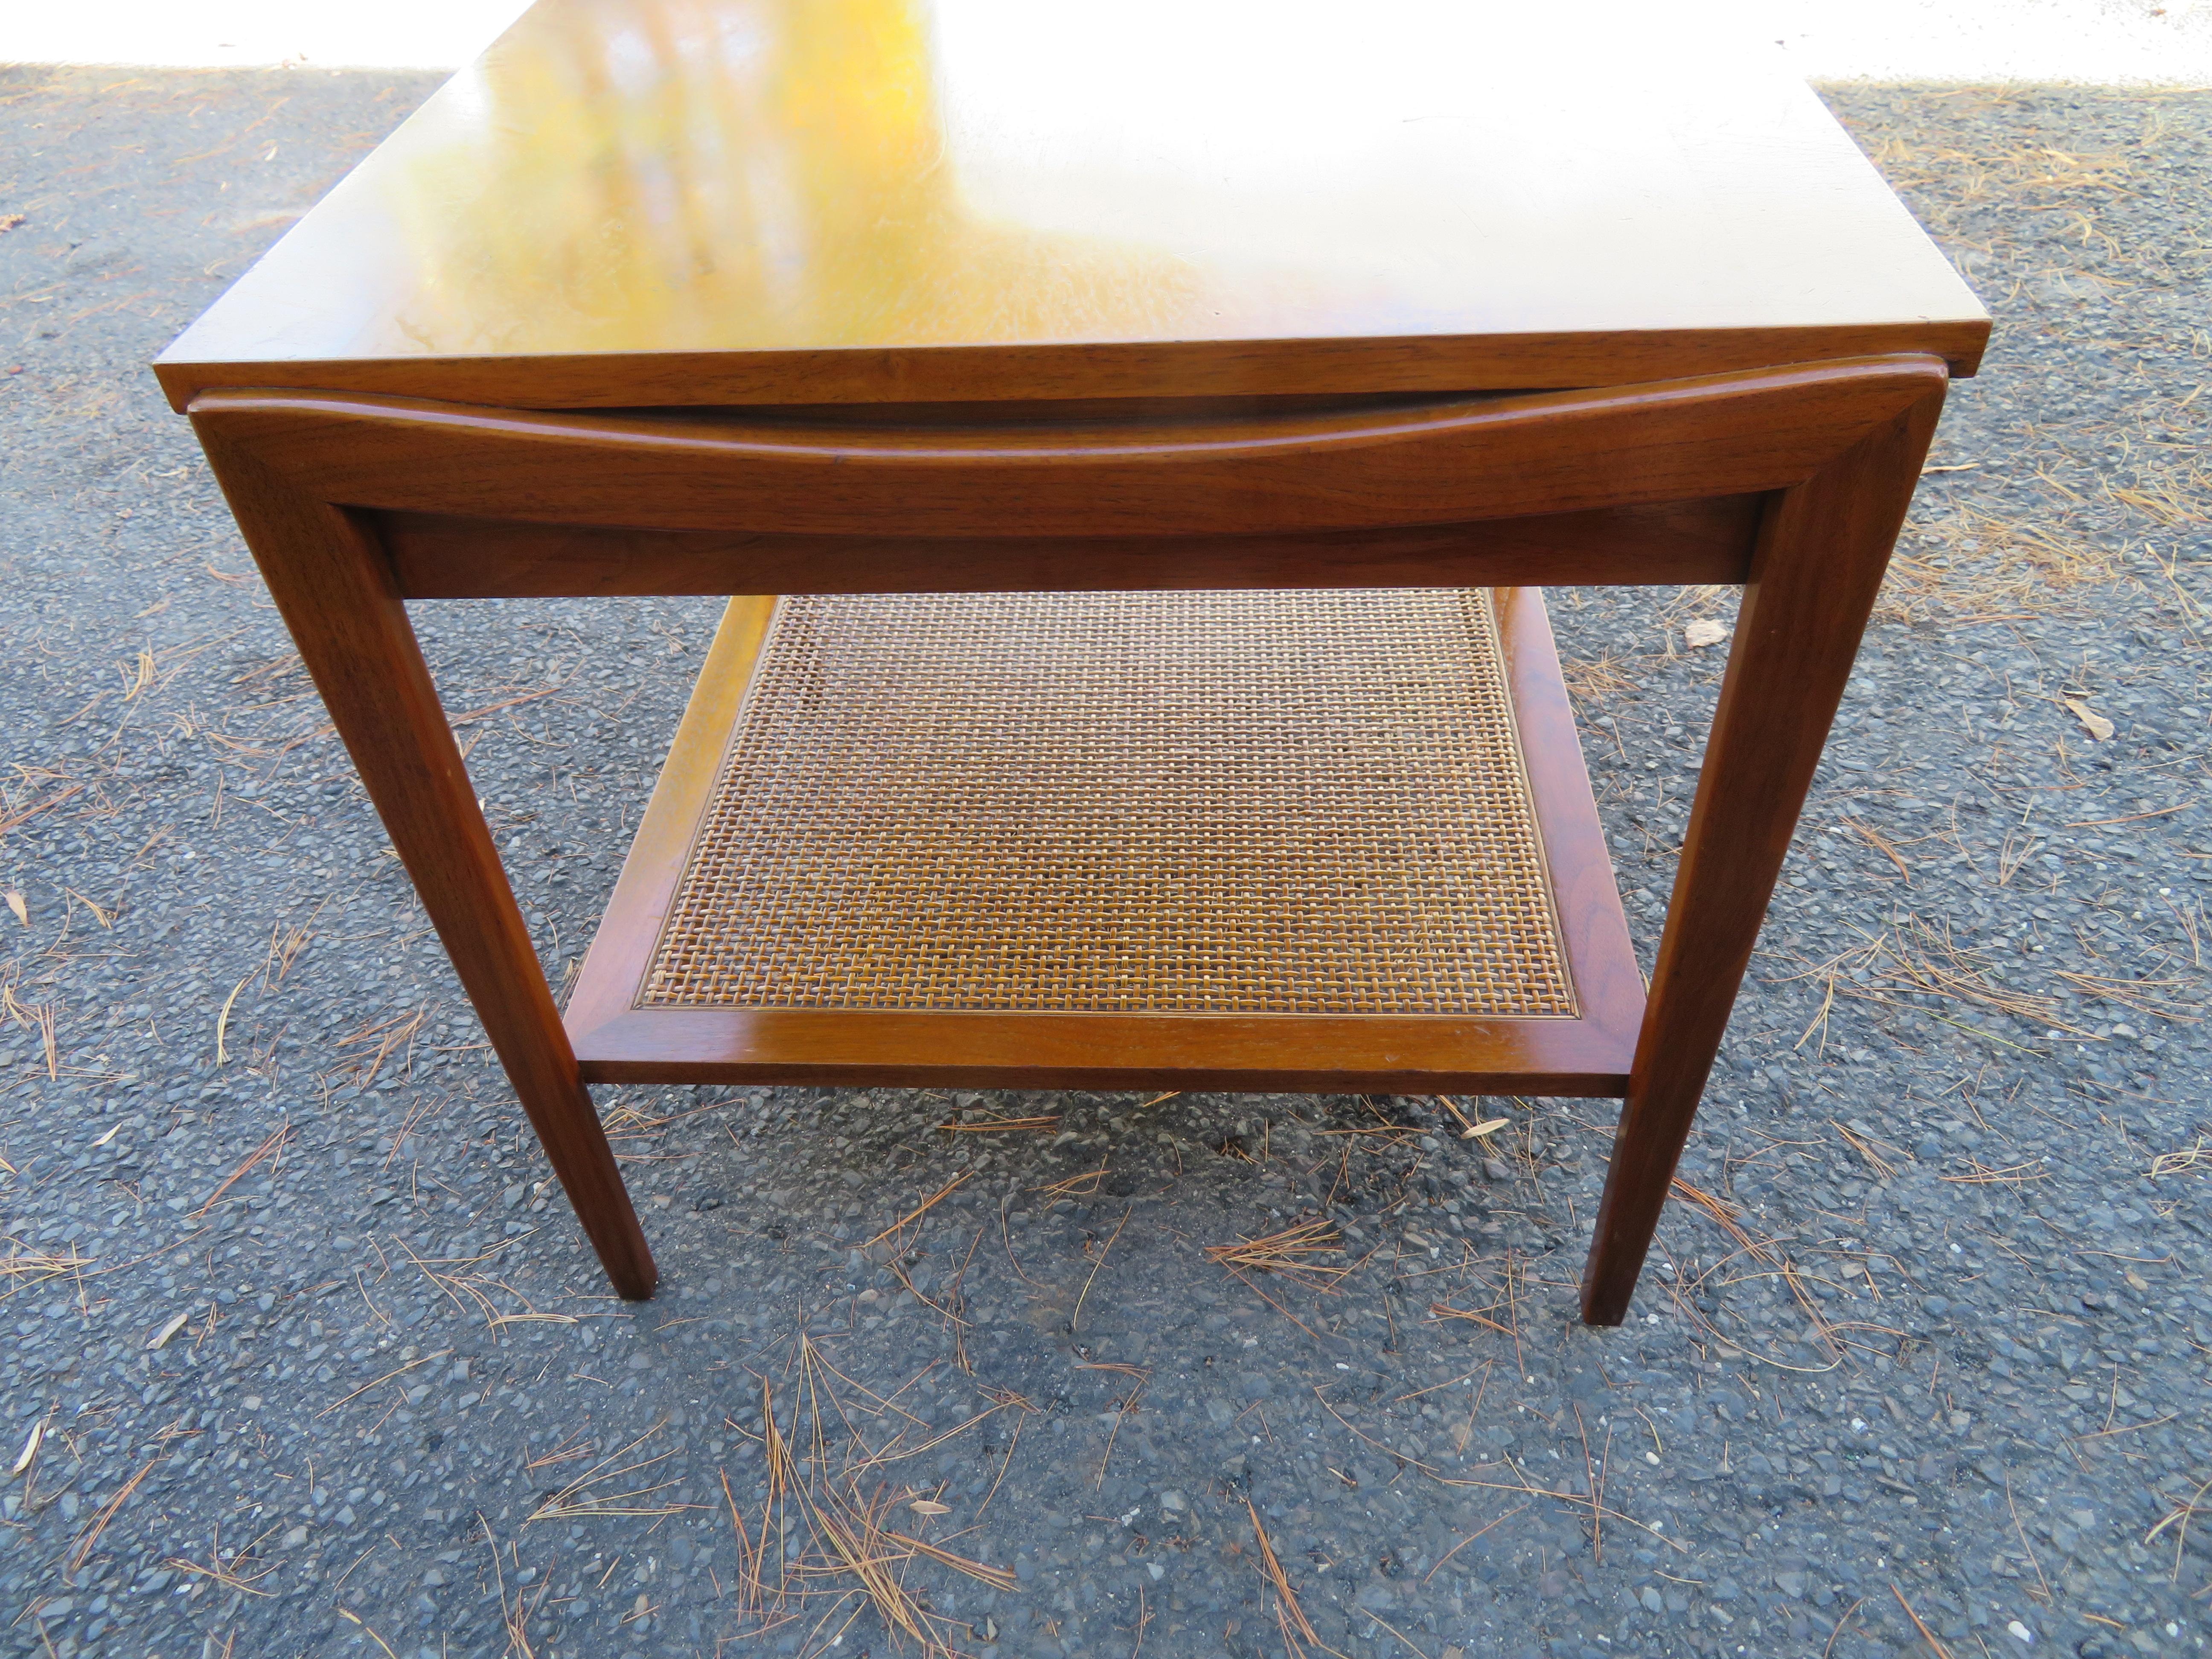 Lovely Widdicomb Walnut & Cane Single Drawer End Table Mid-Century Modern For Sale 3